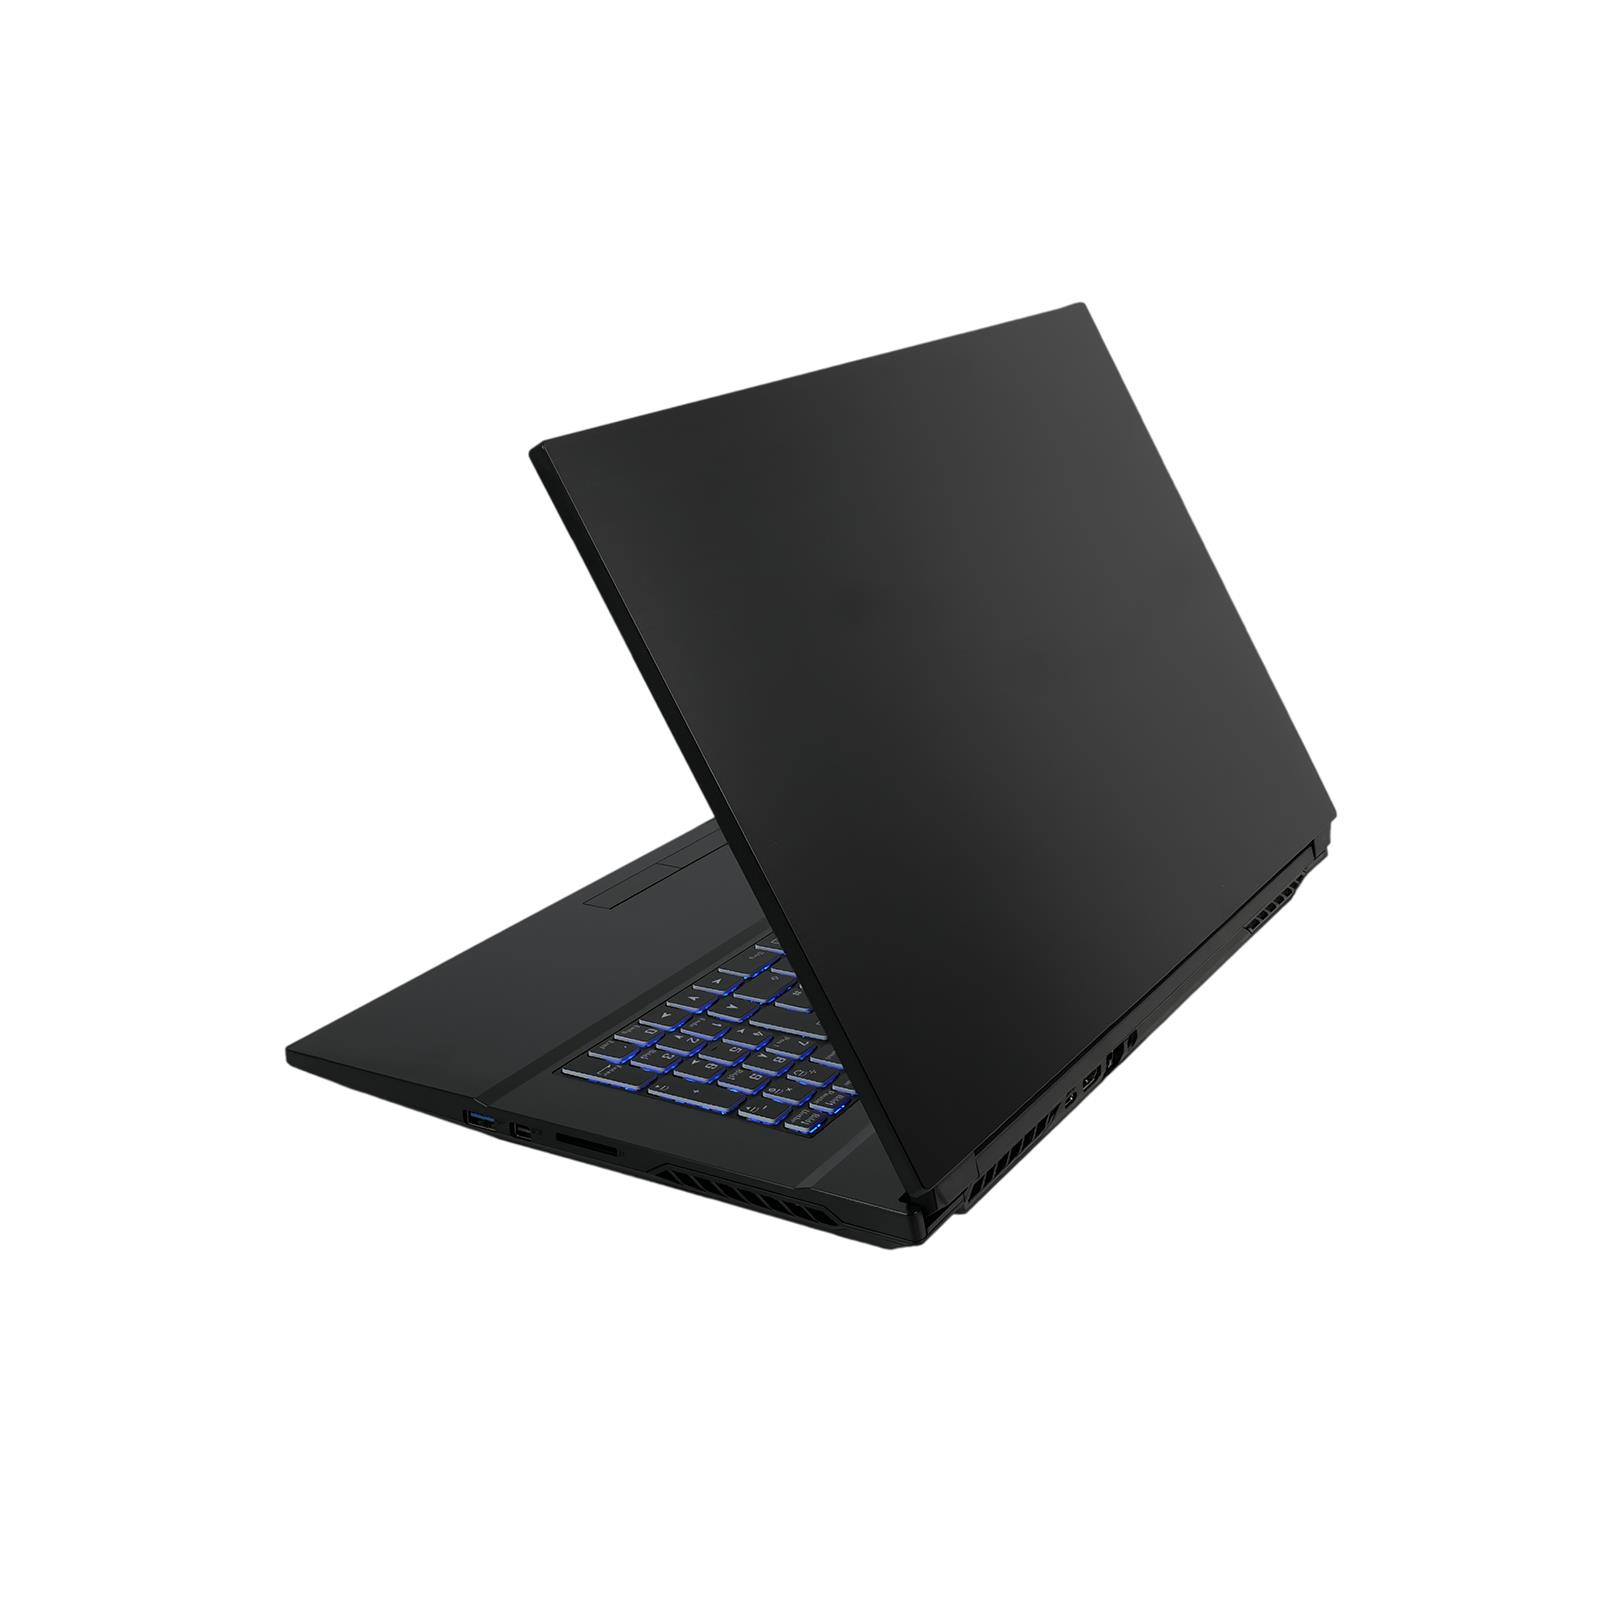 SSD, RTX 16 Zoll Schwarz Mobile, mit DCL24 Intel® GB Notebook Gaming Display, RAM, GH7, i5 Core™ 17,3 1000 Prozessor, GB 3060